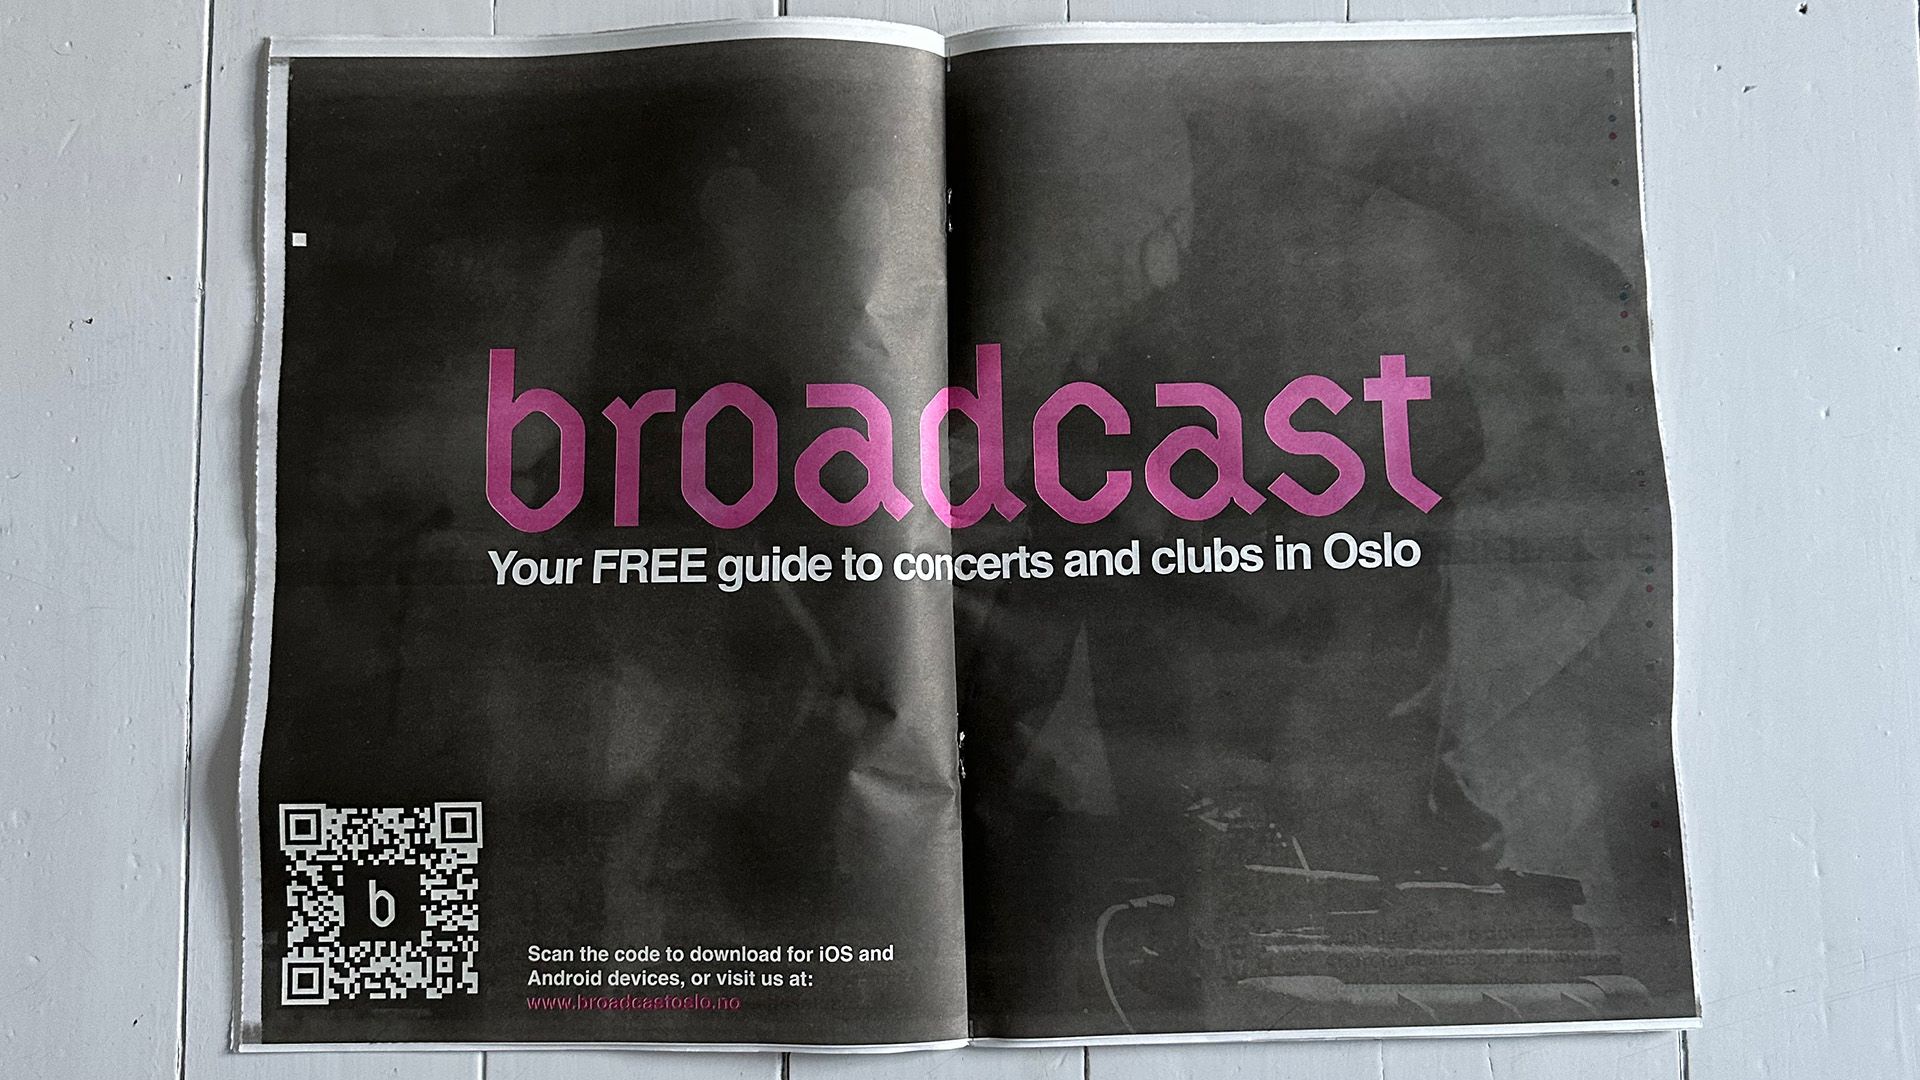 Cover Image for Broadcast is in the latest edition of Natt&Dag!